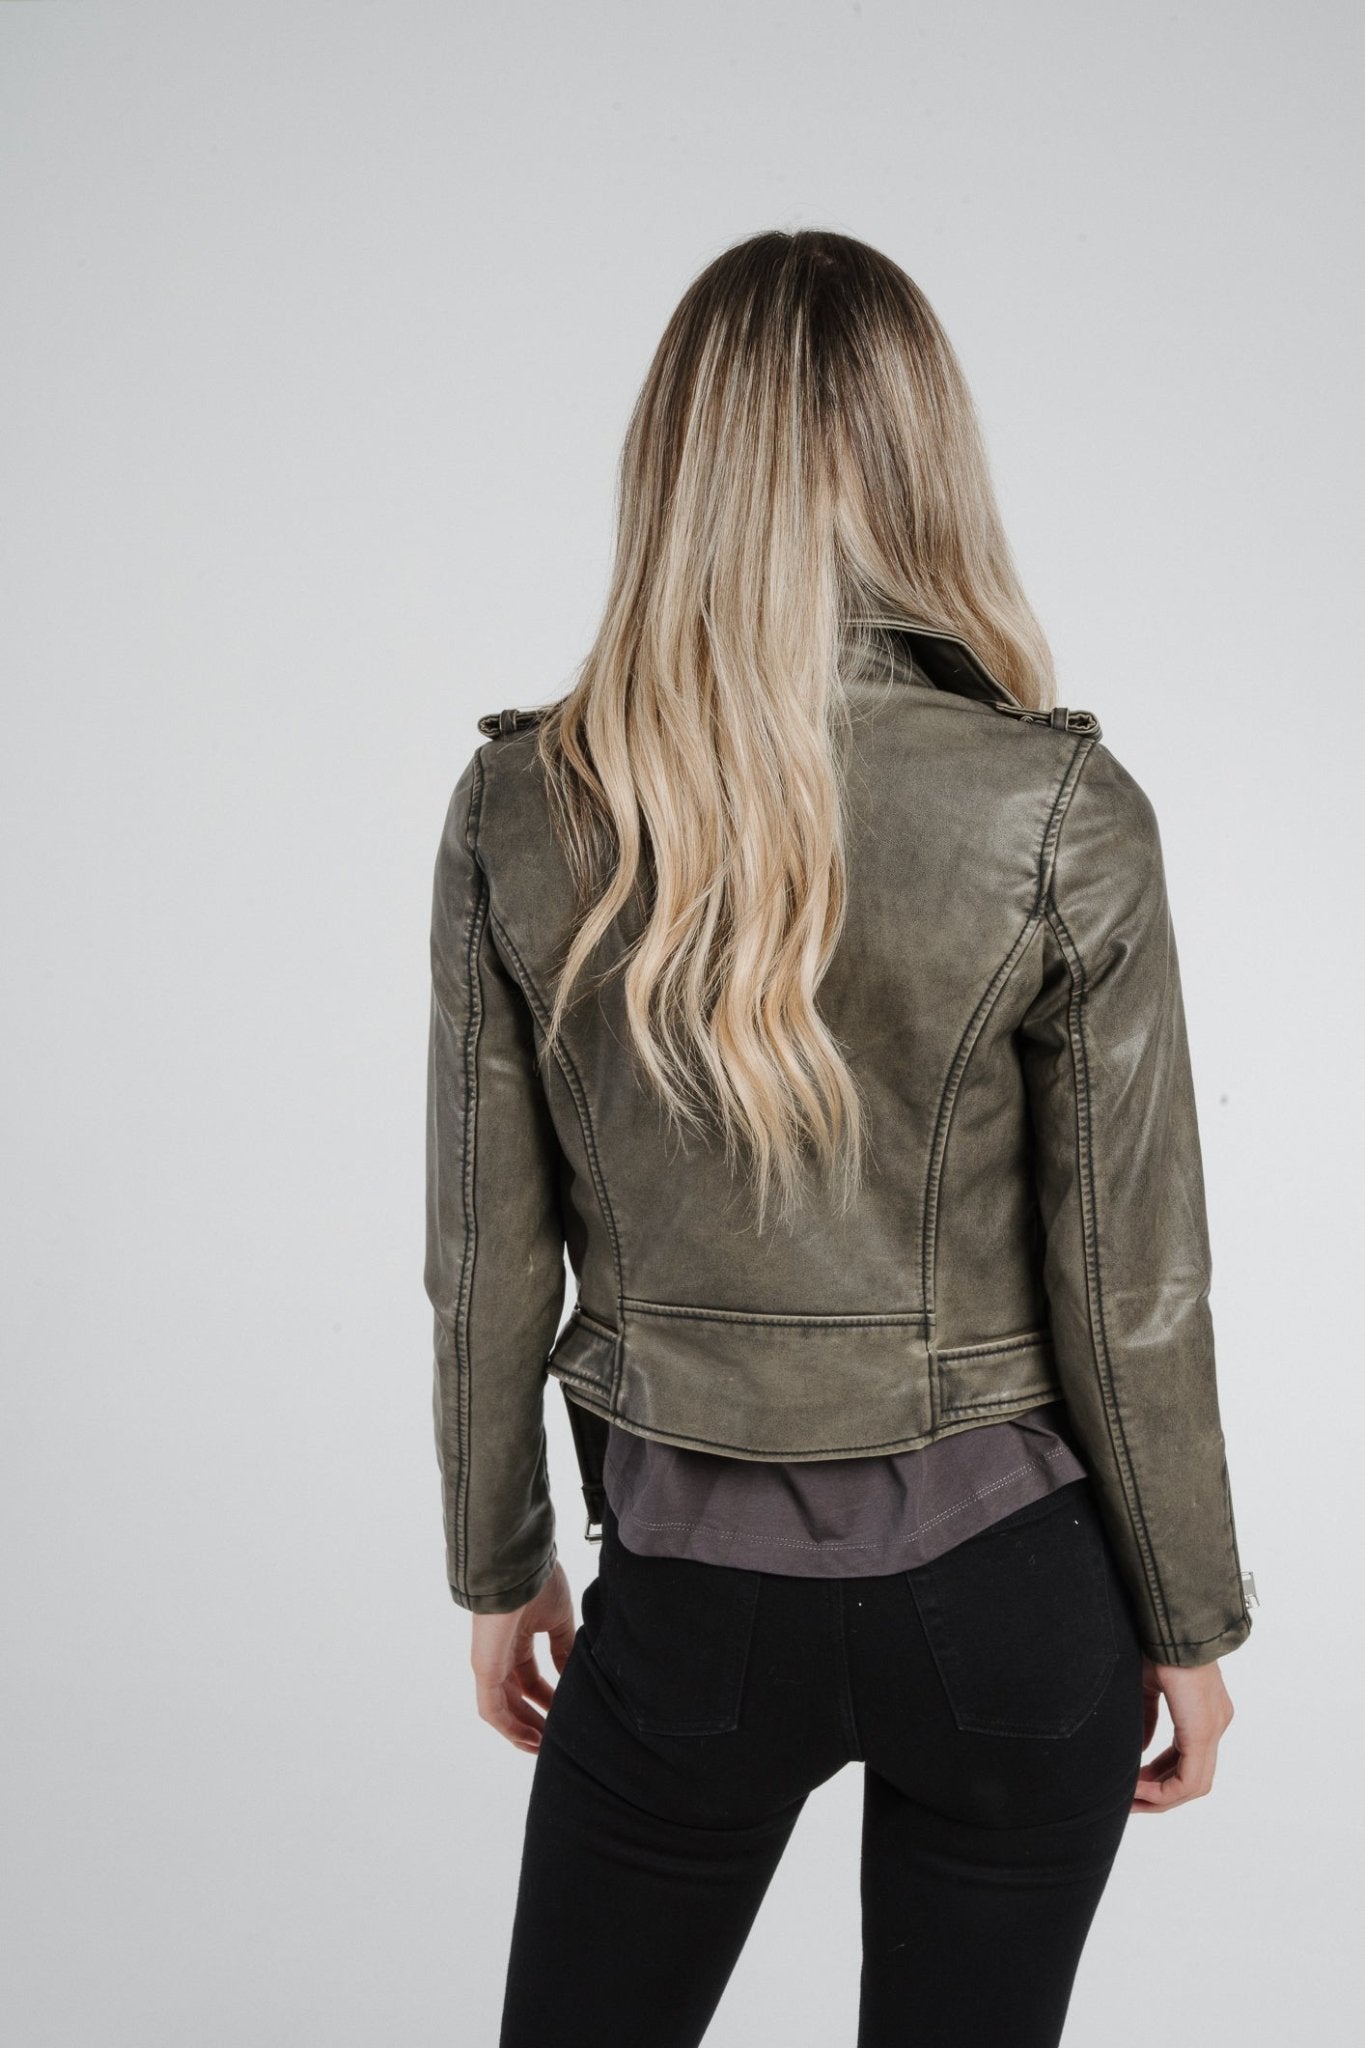 Caitlyn Distressed Leather Jacket In Green - The Walk in Wardrobe